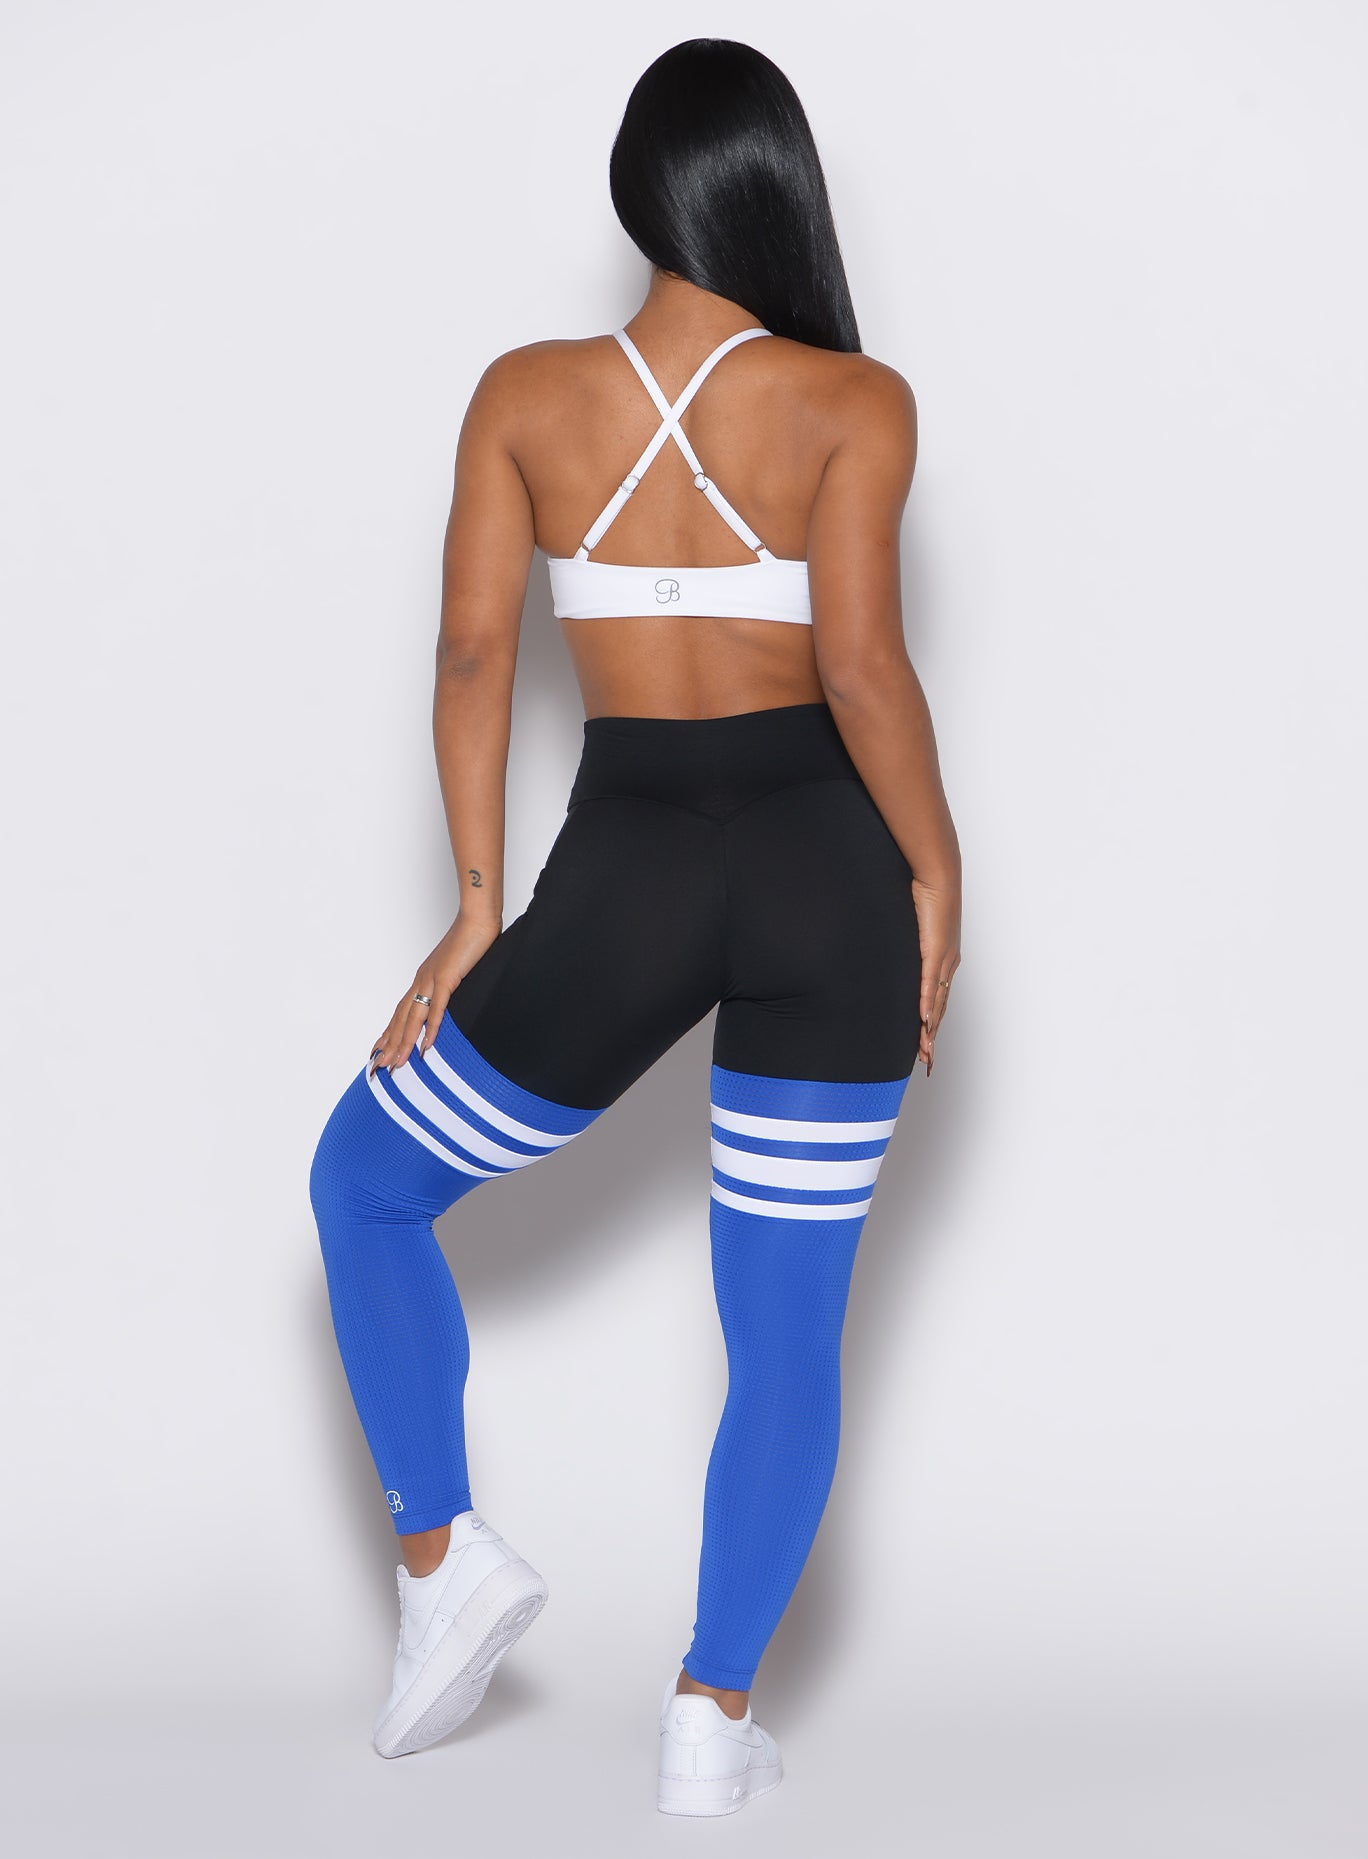 Back profile view of a model wearing the Perform Thigh Highs in Black Sky color along with a white sports bra